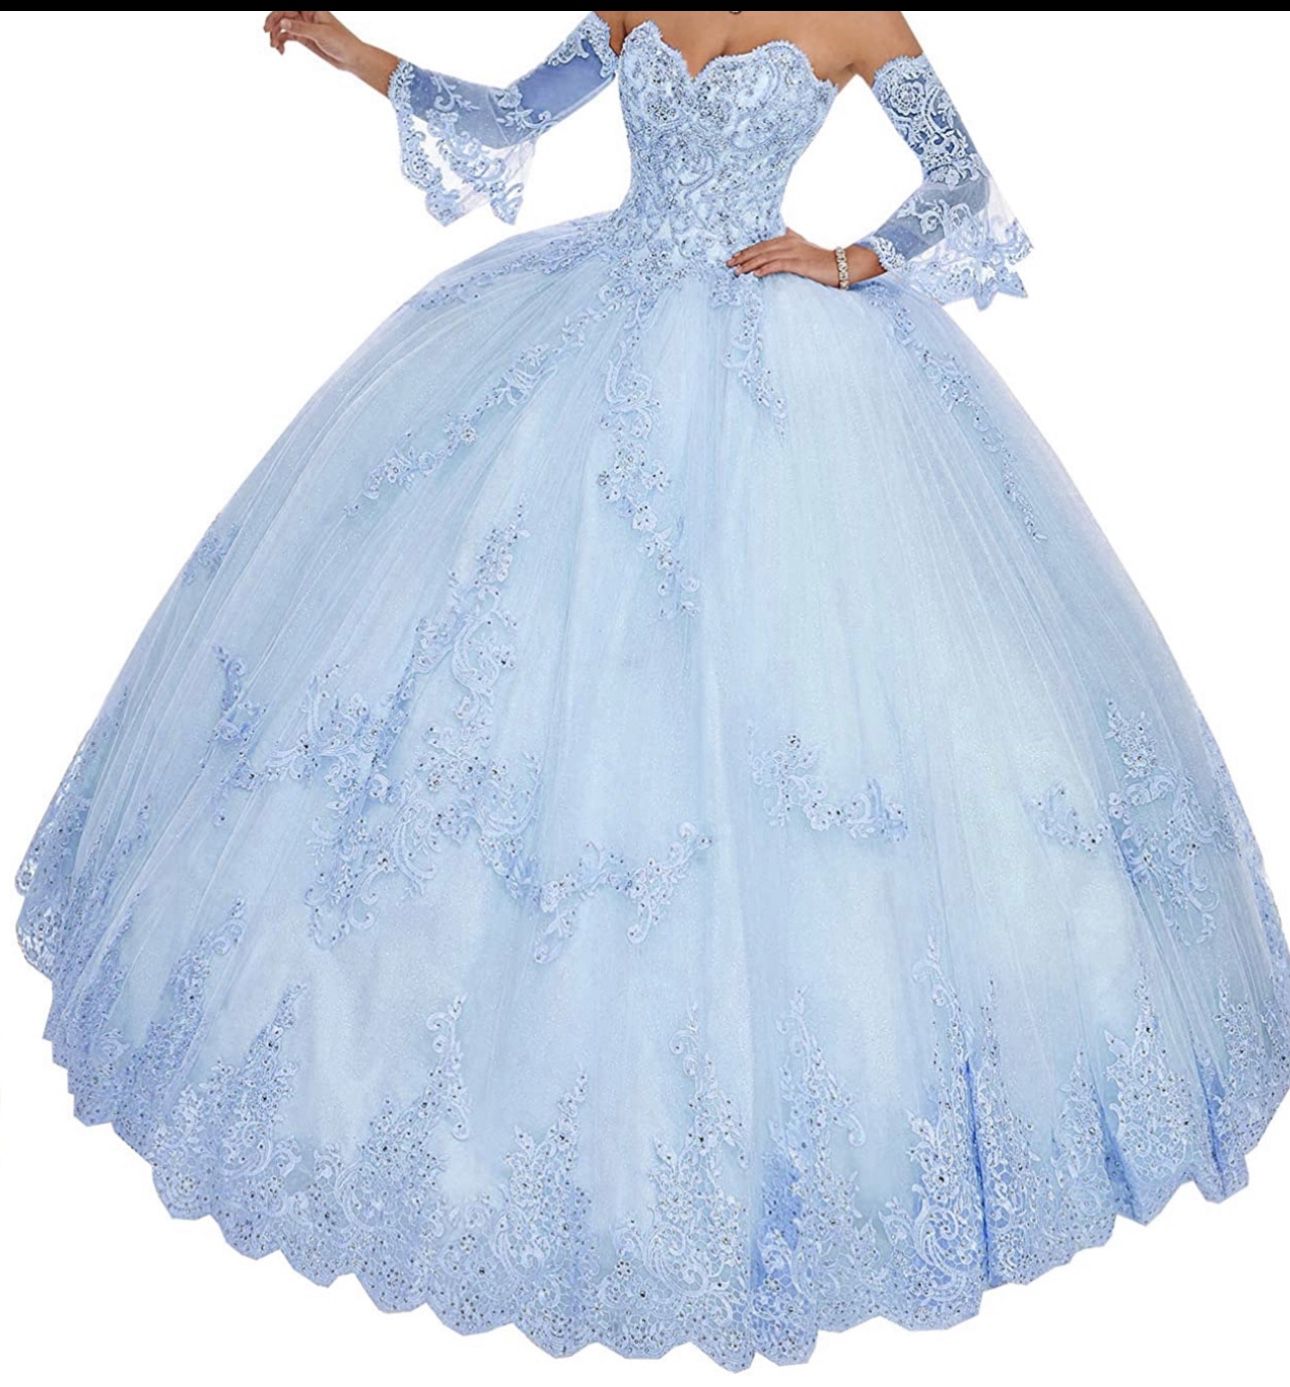 Strapless Blue Quince/Wedding Dress With Arm Sleeves 